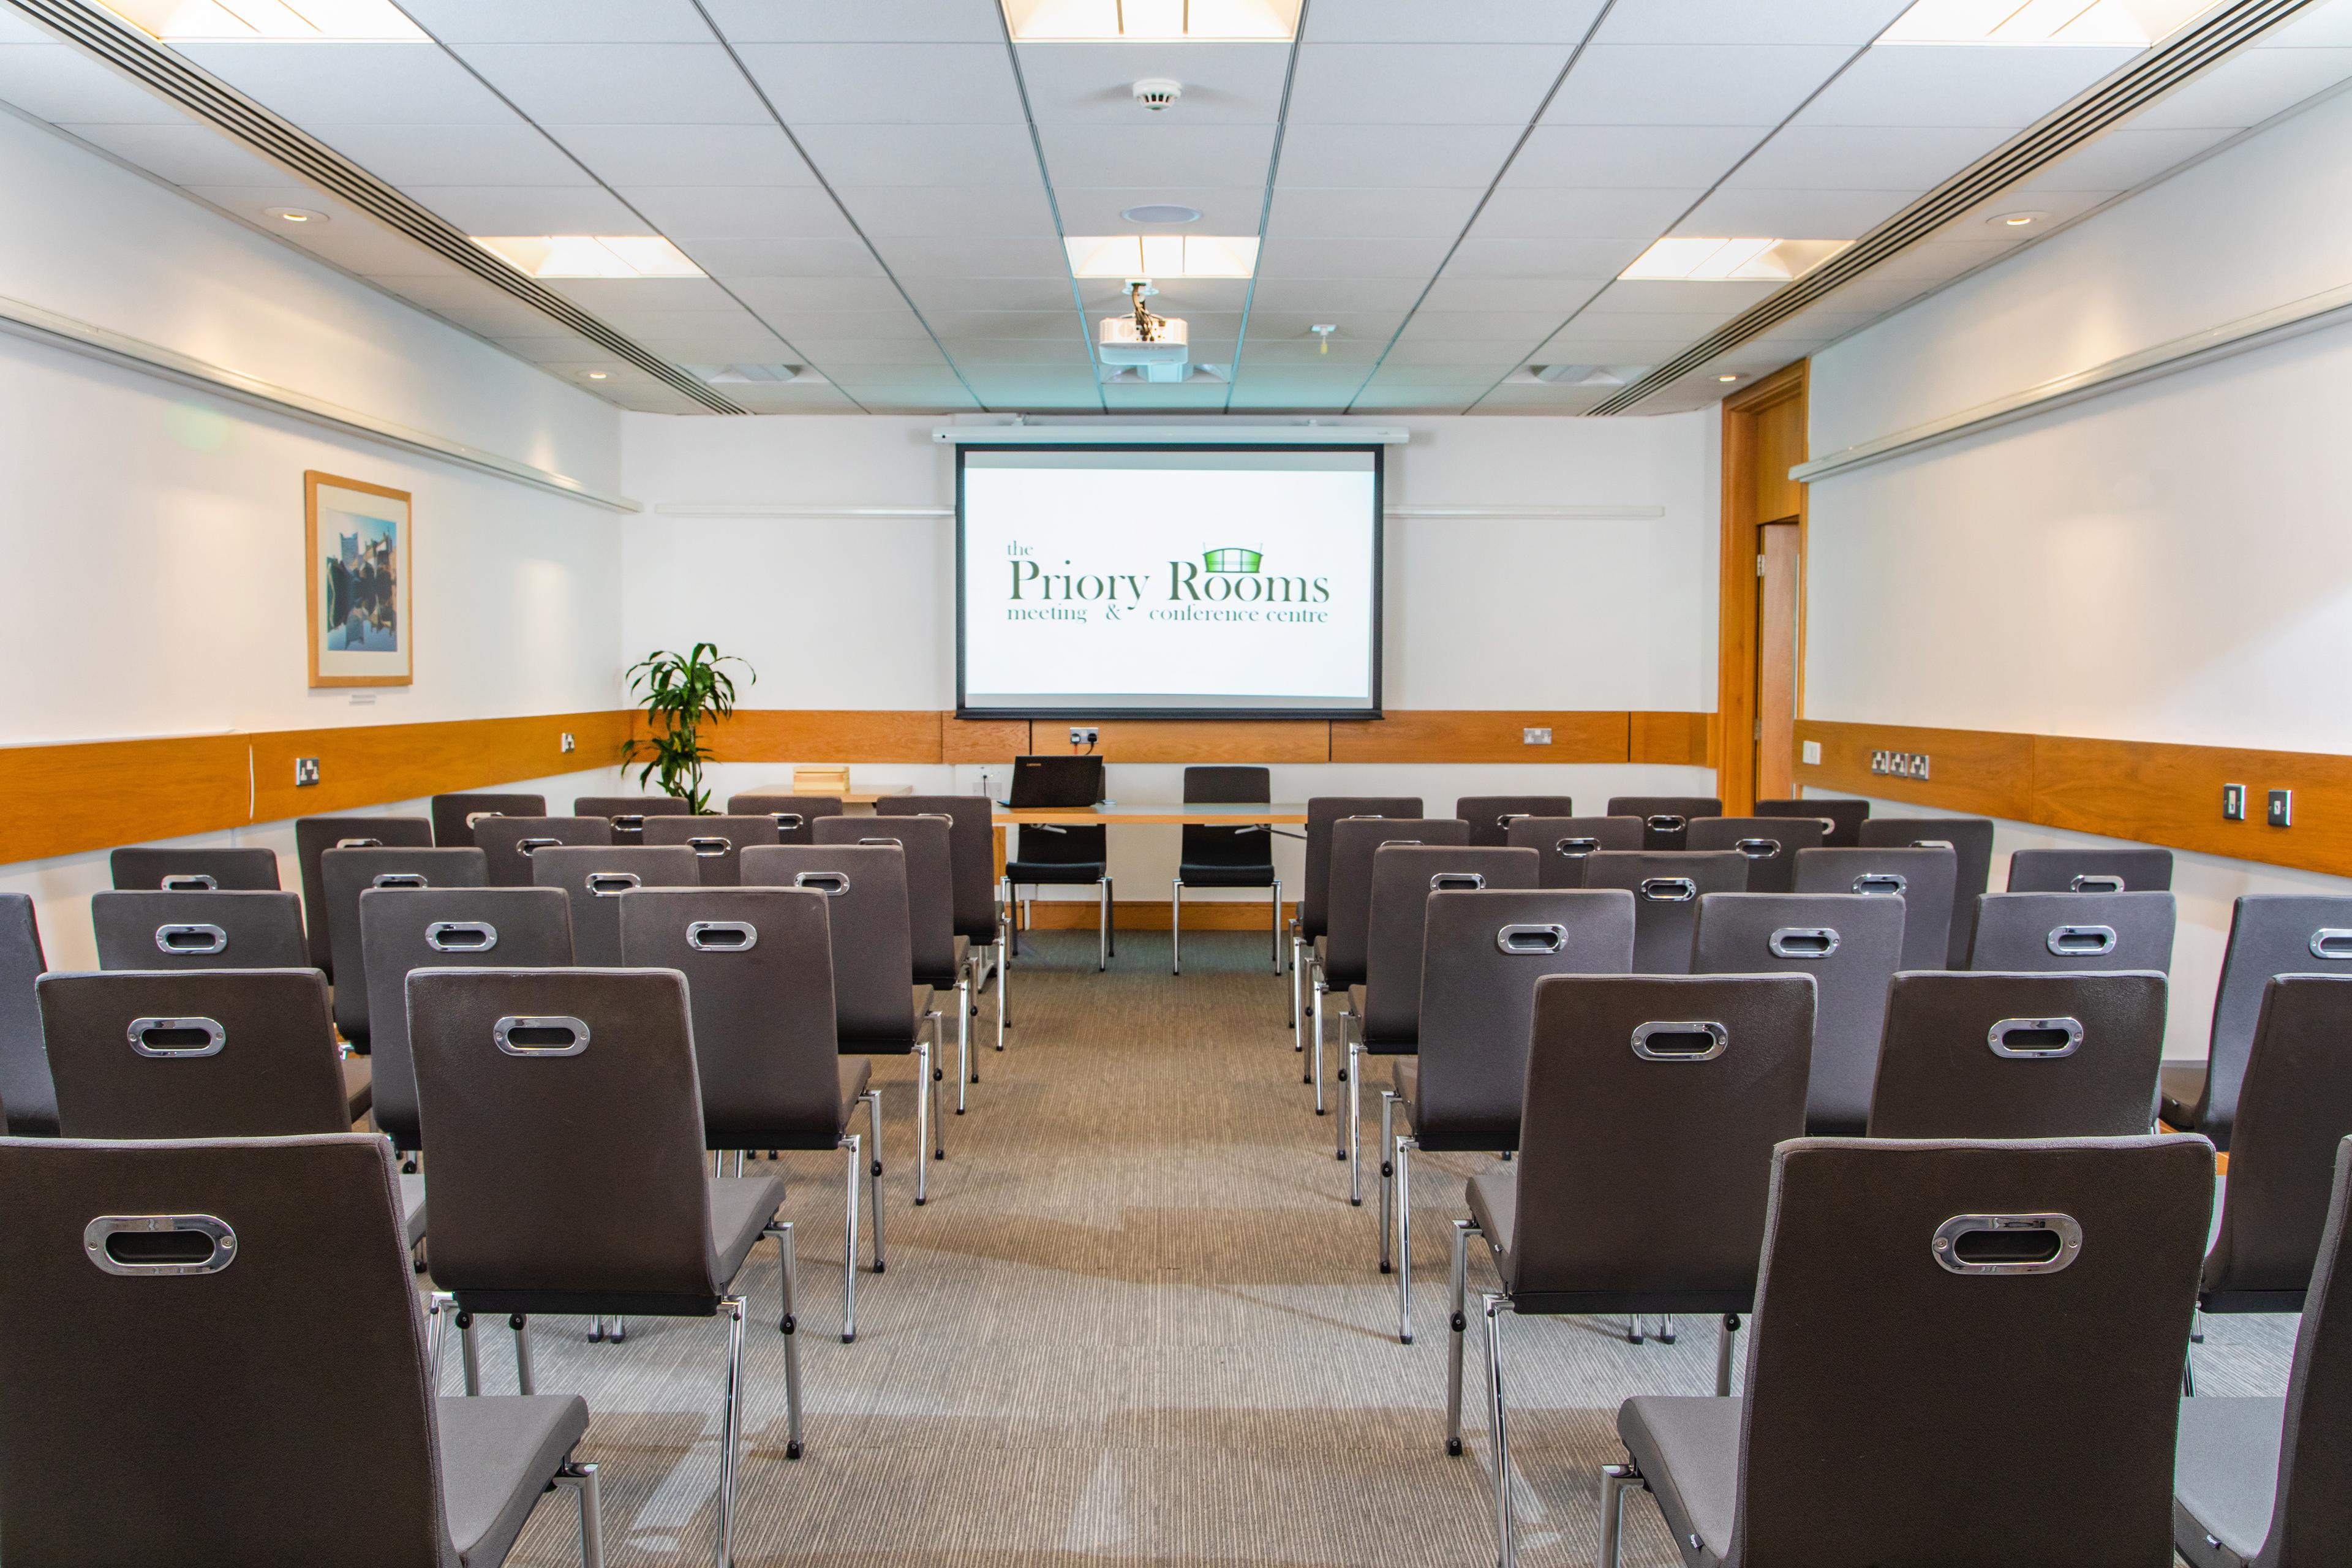 The George Fox Room, The Priory Rooms Meeting & Conference Centre photo #1